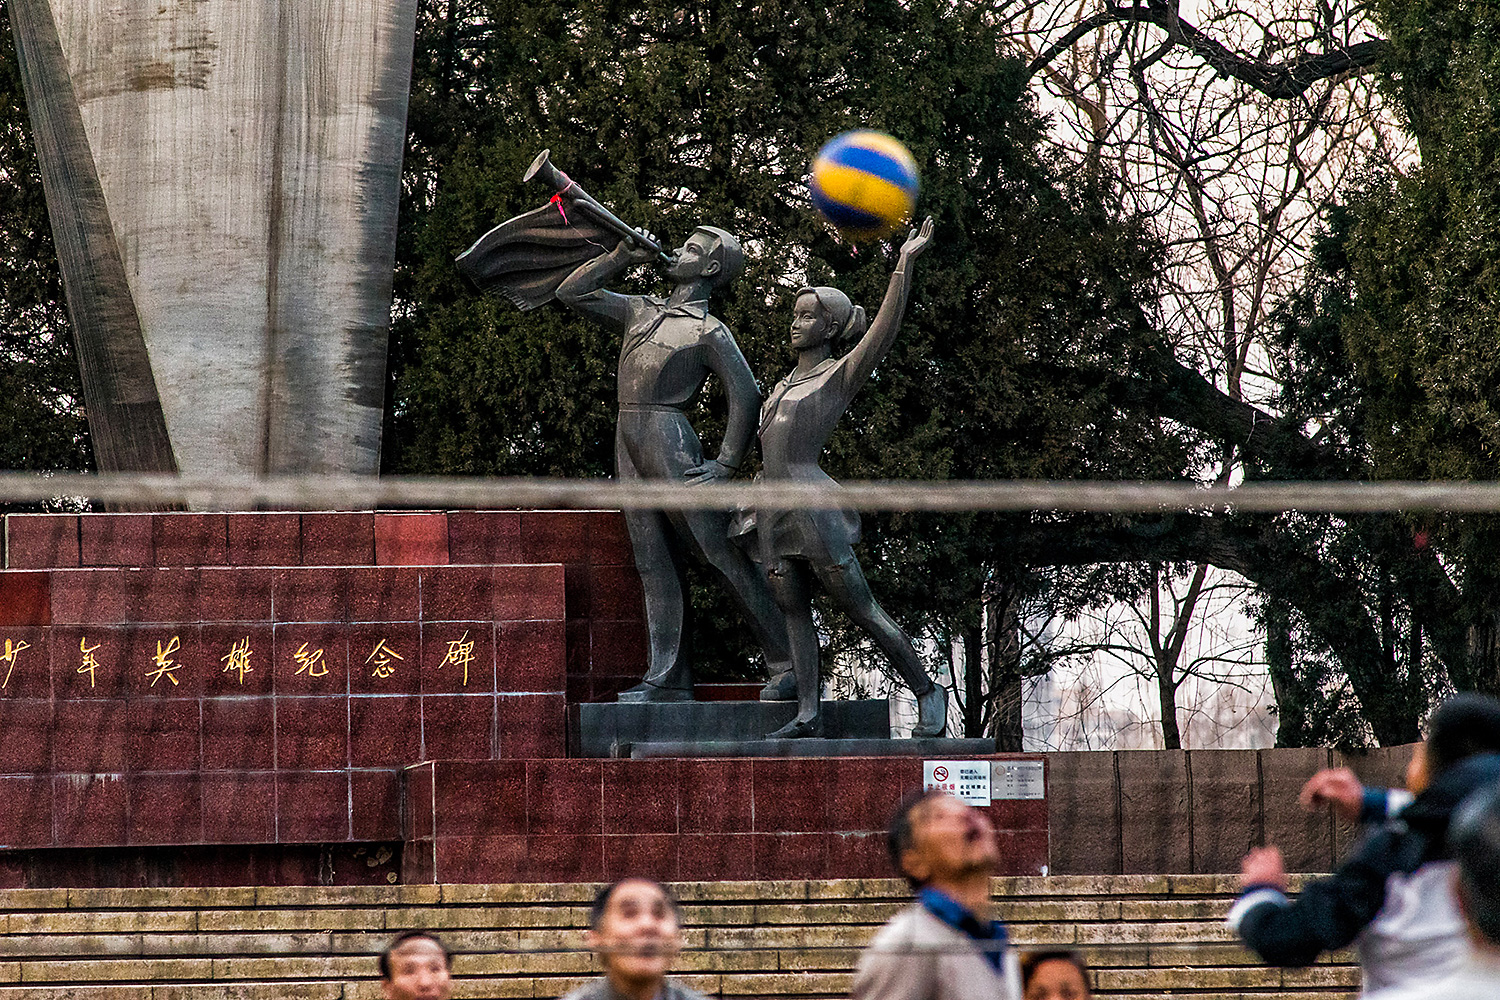 A group plays volleyball in front of the Young Heroes of the Revolution monument in Yuyuantan Park, Beijing. Photo by Laurent Hou @people_of_beijing